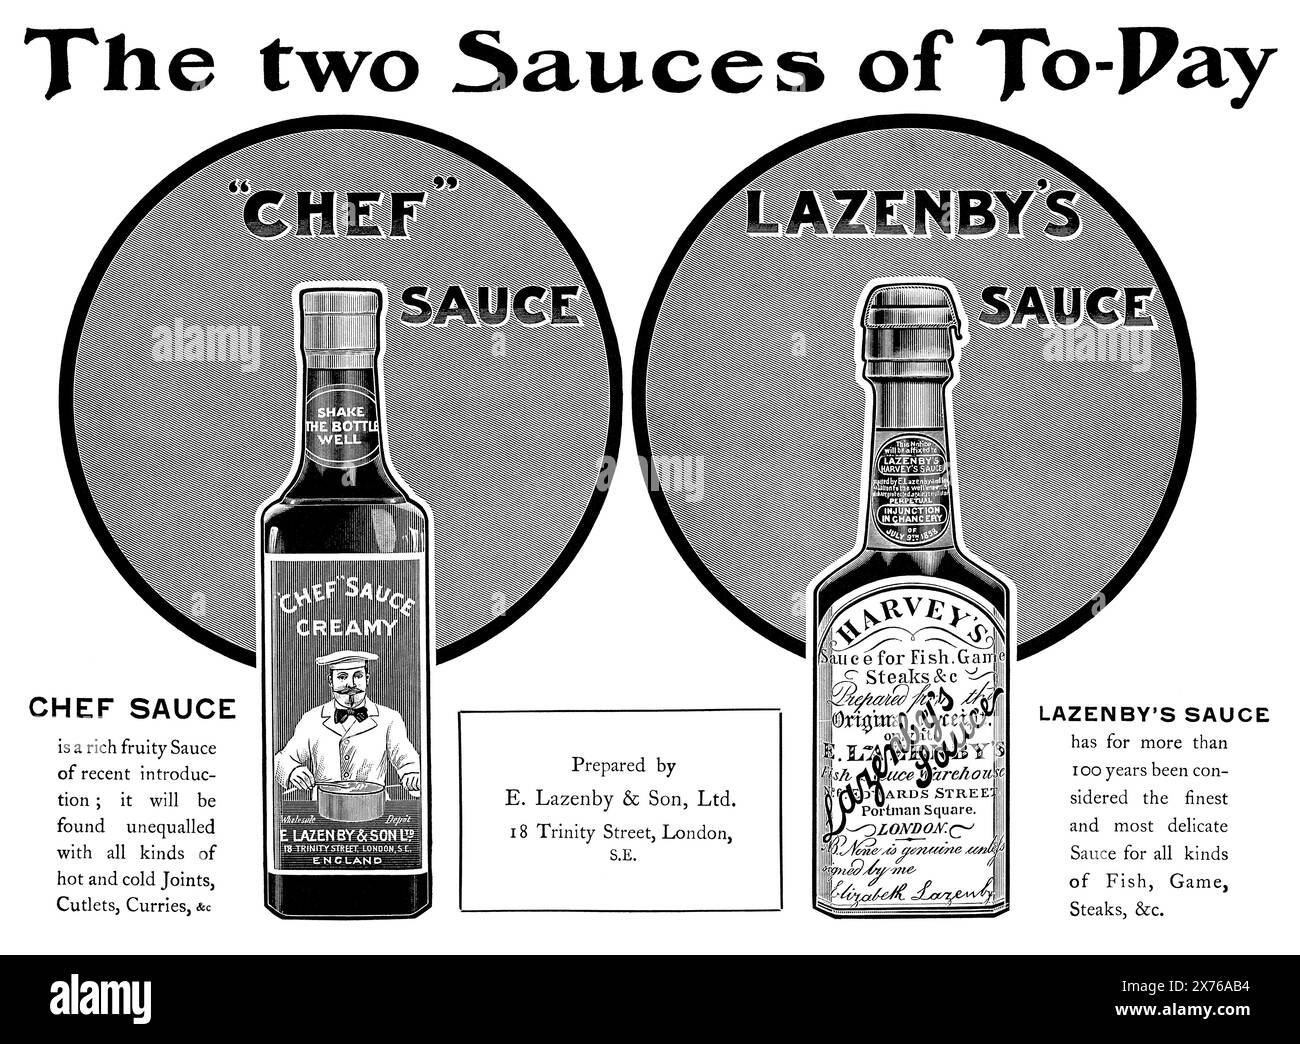 1904 British advertisement for Lazenby's Sauce and Chef Sauce. Stock Photo